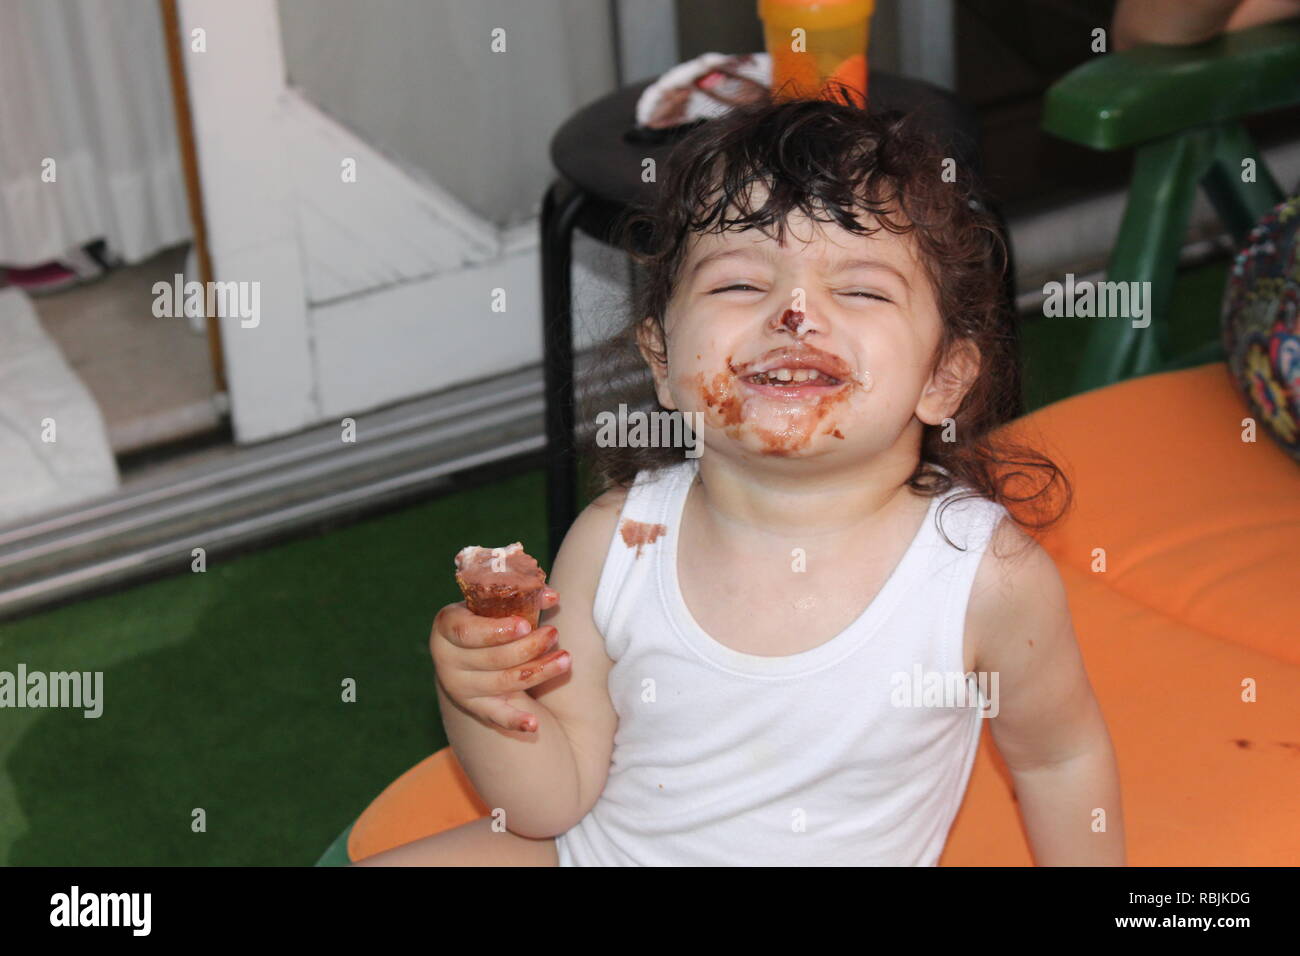 young girl smiling with ice cream Stock Photo